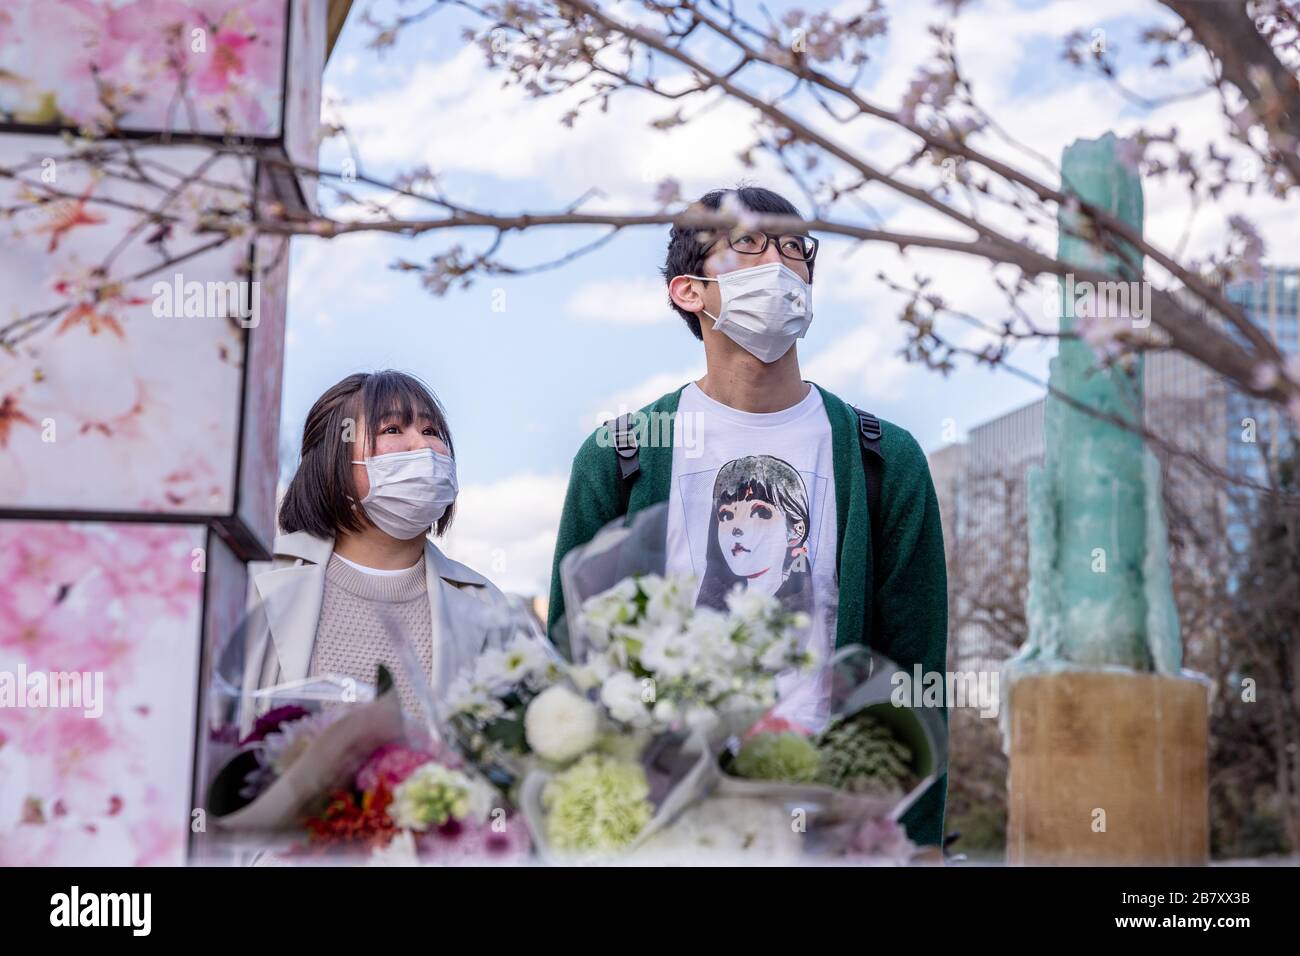 A couple wearing masks as a preventive measure, praying at the 9th anniversary of the 311 mega-earthquake and tsunami during the corona virus pandemic.Concerns are growing about the increasing cases of Coronavirus (COVID-19) in Japan. Many countries have closed borders to Japan and the growing epidemic has caught public attention on the true number of coronavirus cases in Japan that could be much higher. Stock Photo